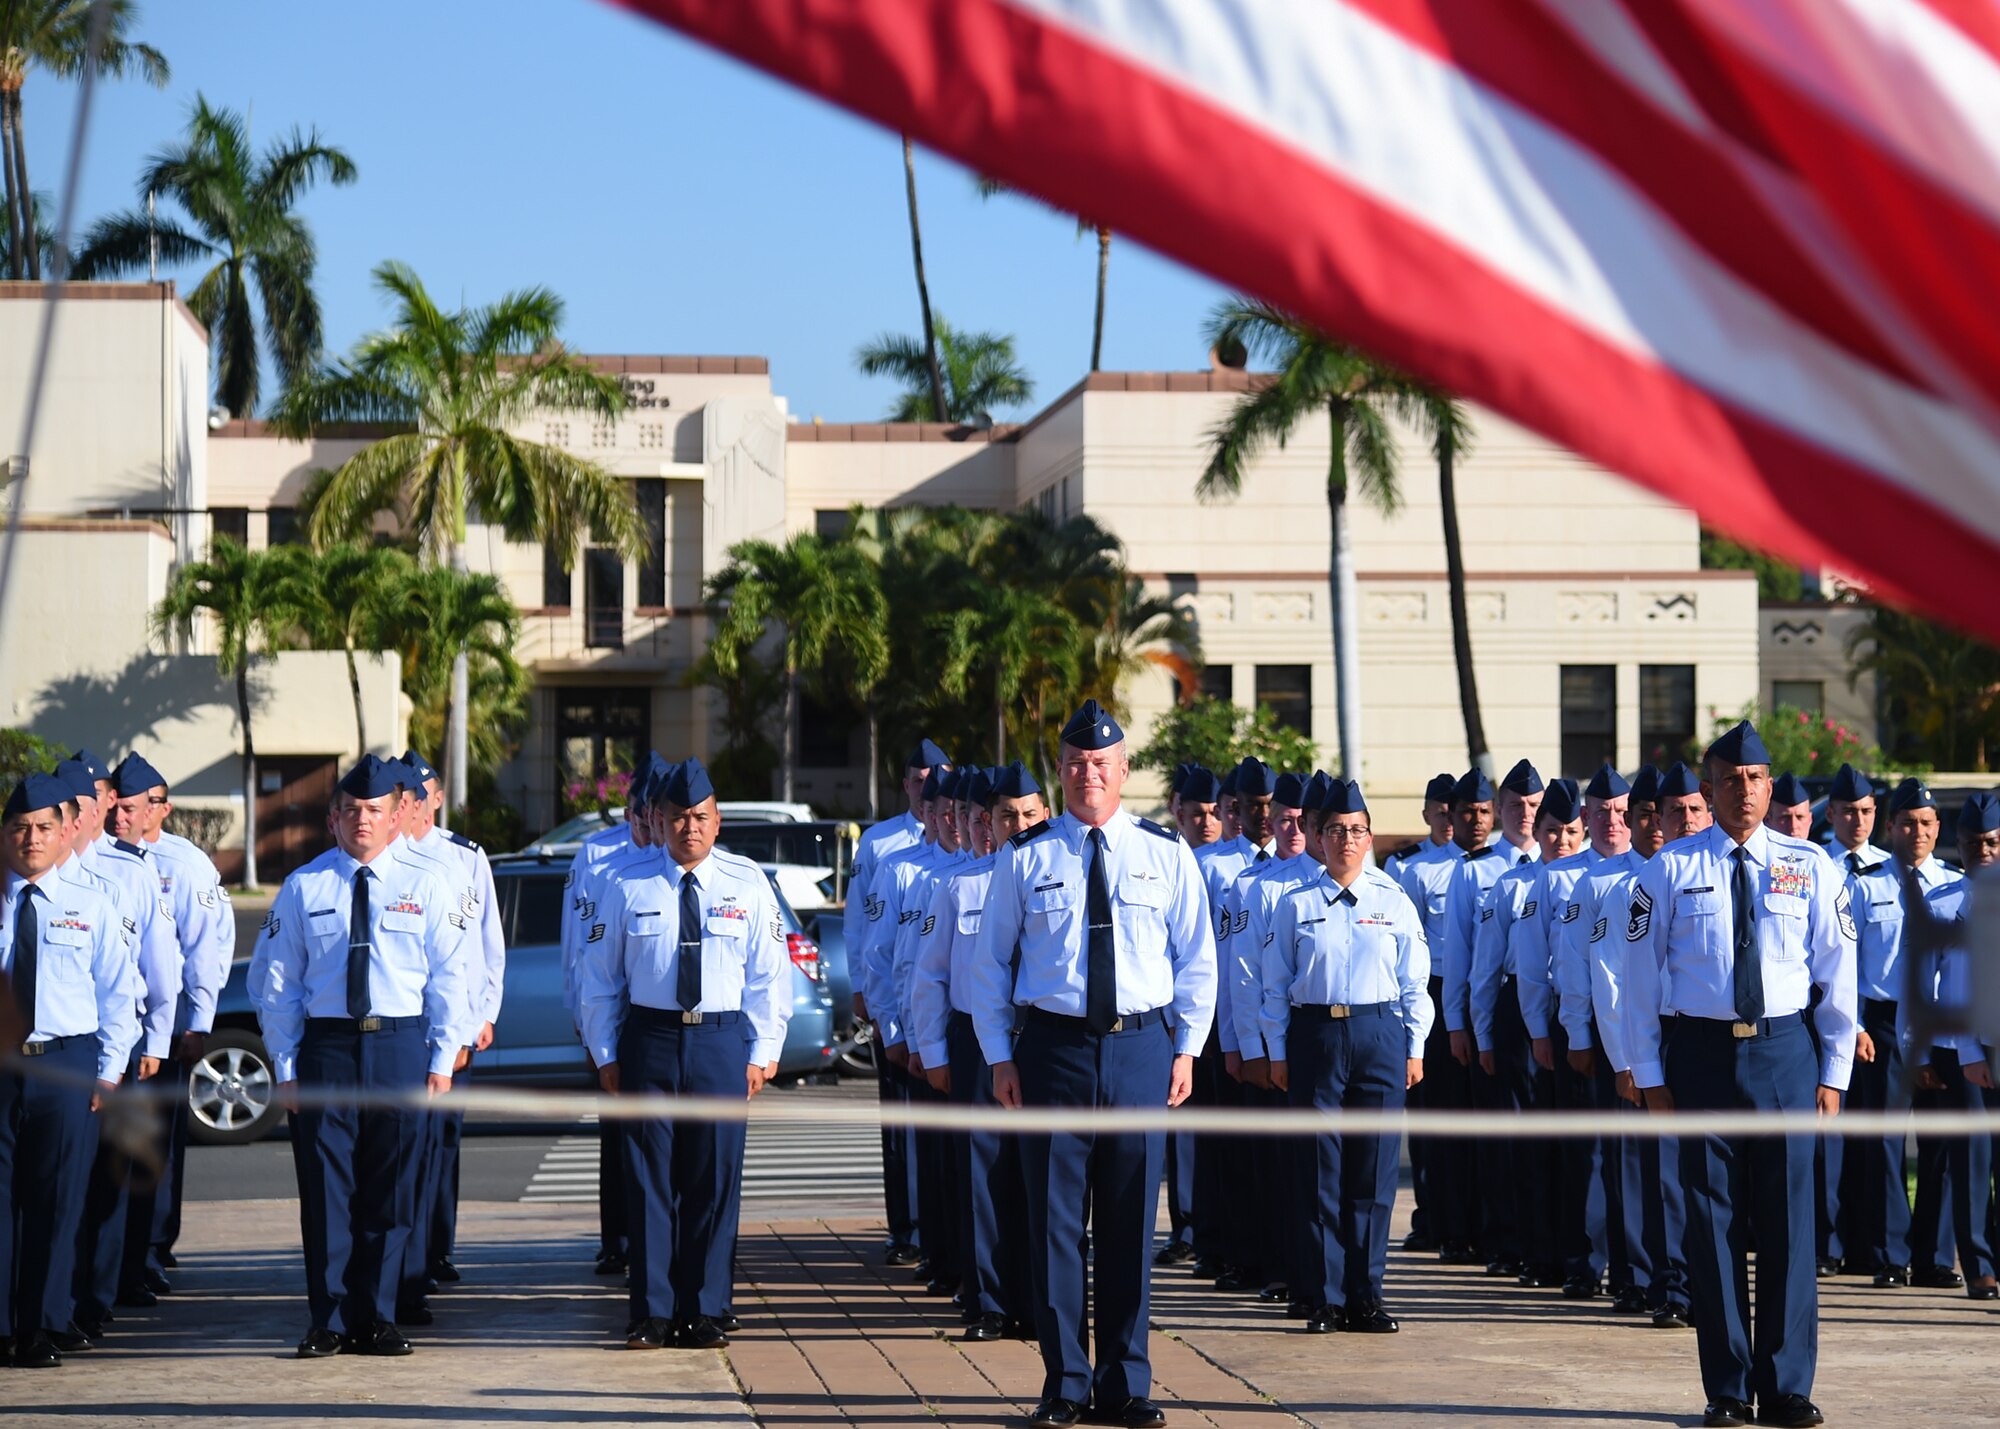 U.S. Air Force Lt. Col. Jeffrey Guimarin, 747th Communication Squadron commander, commands the 747th Communication flight during a Reveille ceremony on Joint Base Pearl Harbor-Hickam, Hawaii, July 2, 2015. The ceremony was performed by 60 Airmen from the 747th CS in honor of Independence Day. (U.S. Air Force photo by Tech. Sgt. Aaron Oelrich/Released) 